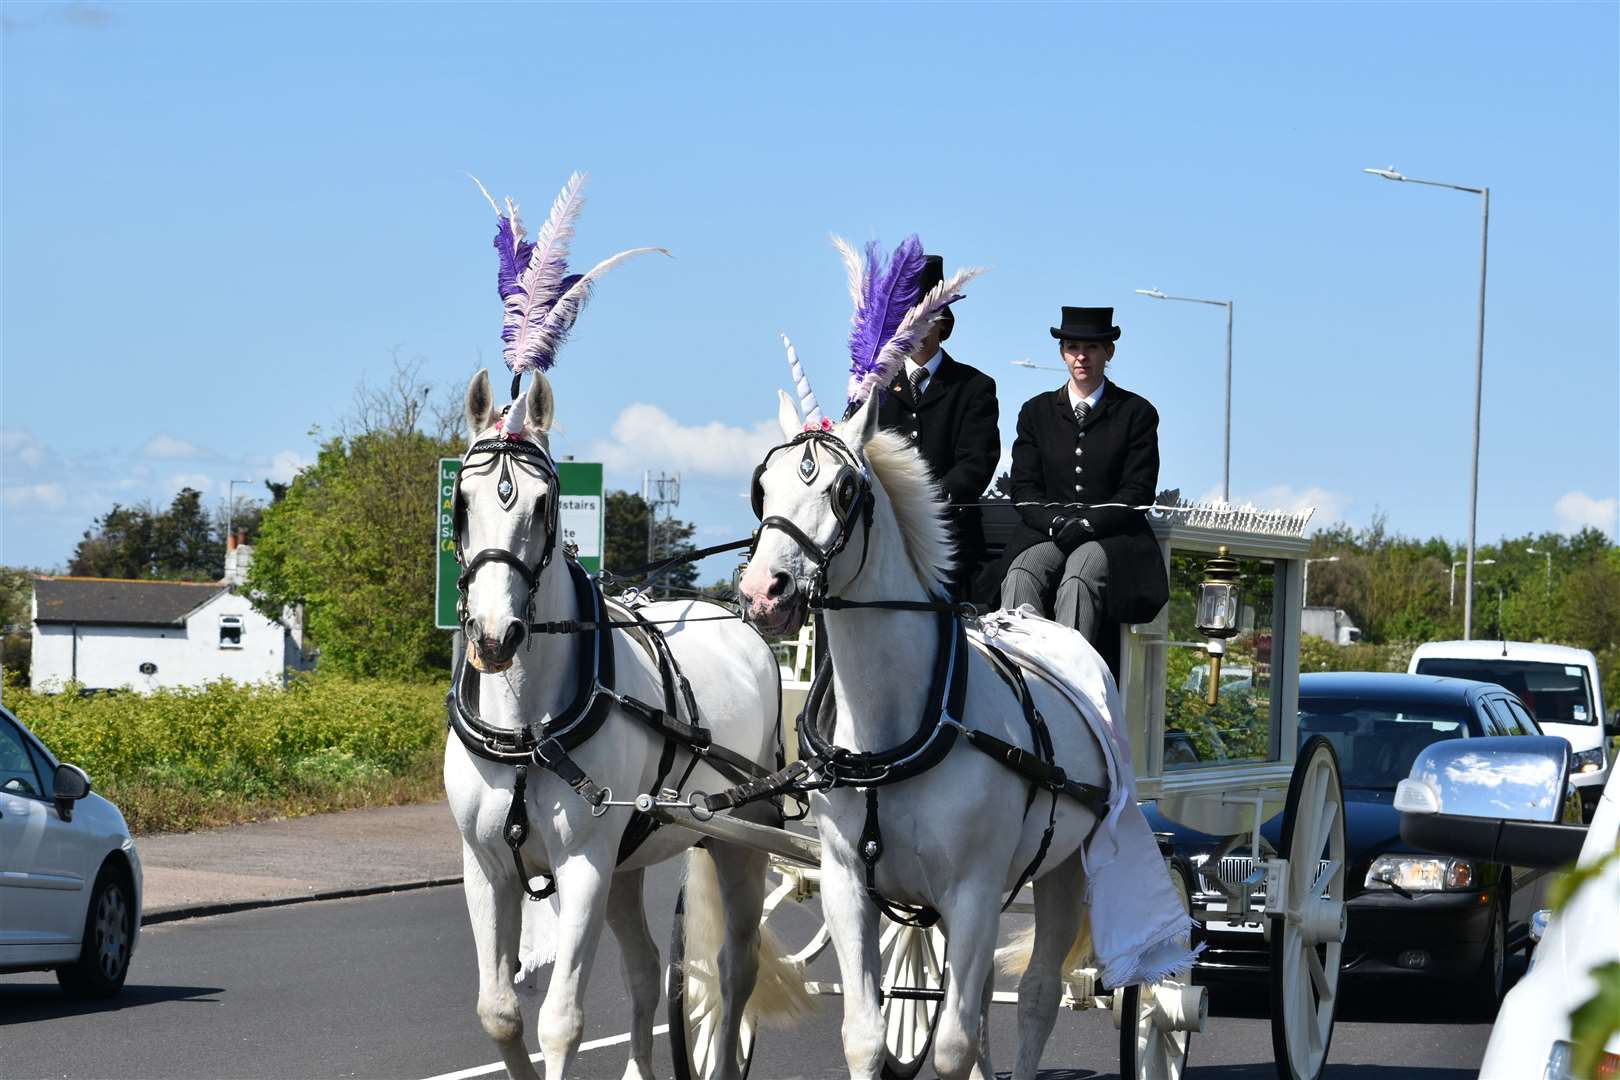 Horses at her funeral were transformed into unicorns